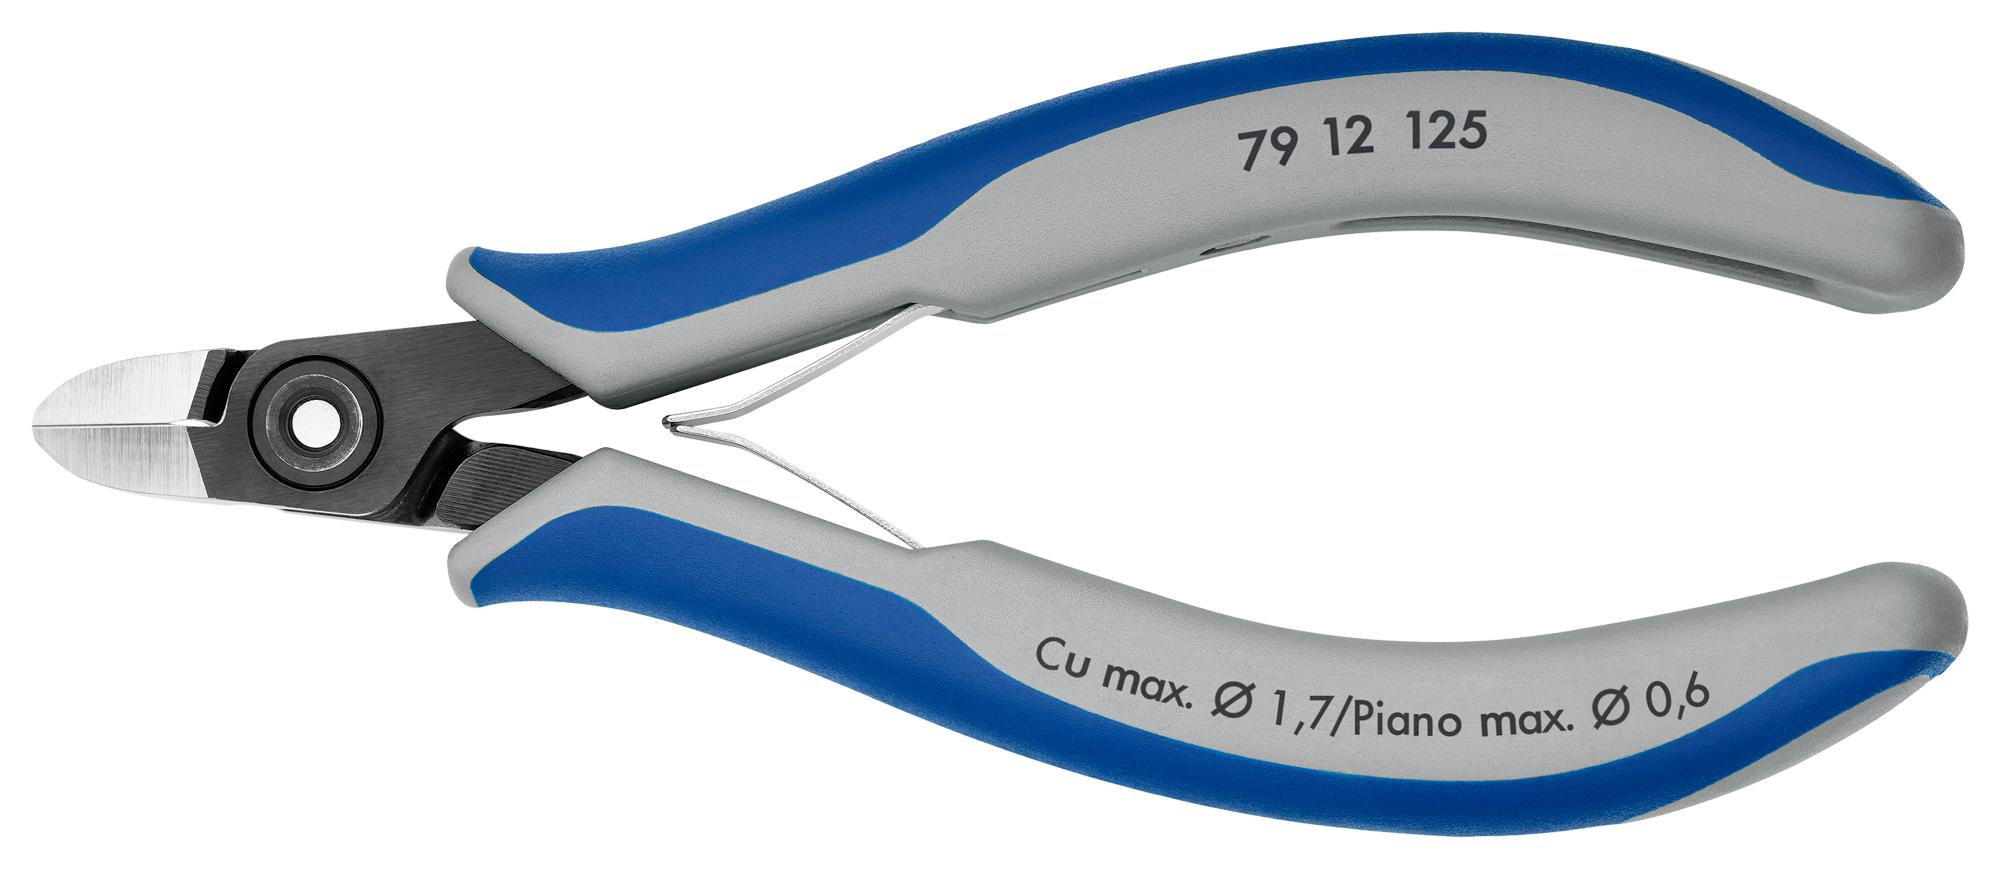 Knipex 79 12 125 Side Cutters, Electronic Precision